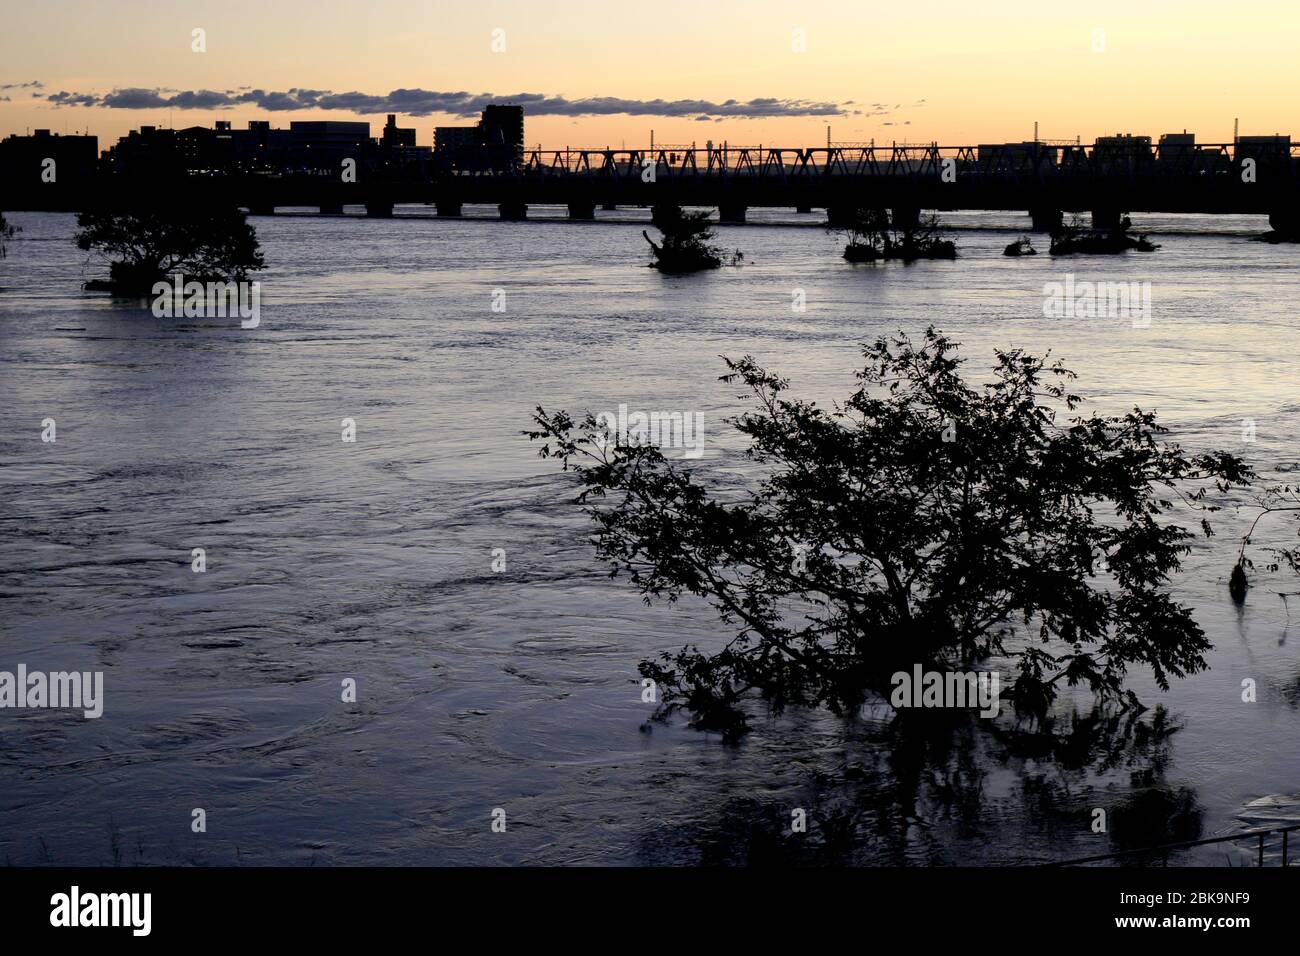 Scenery of the lower reaches of the Tama River in the morning when typhoon No. 19 accompanied by heavy rain passed by on October 13, 2019 Stock Photo